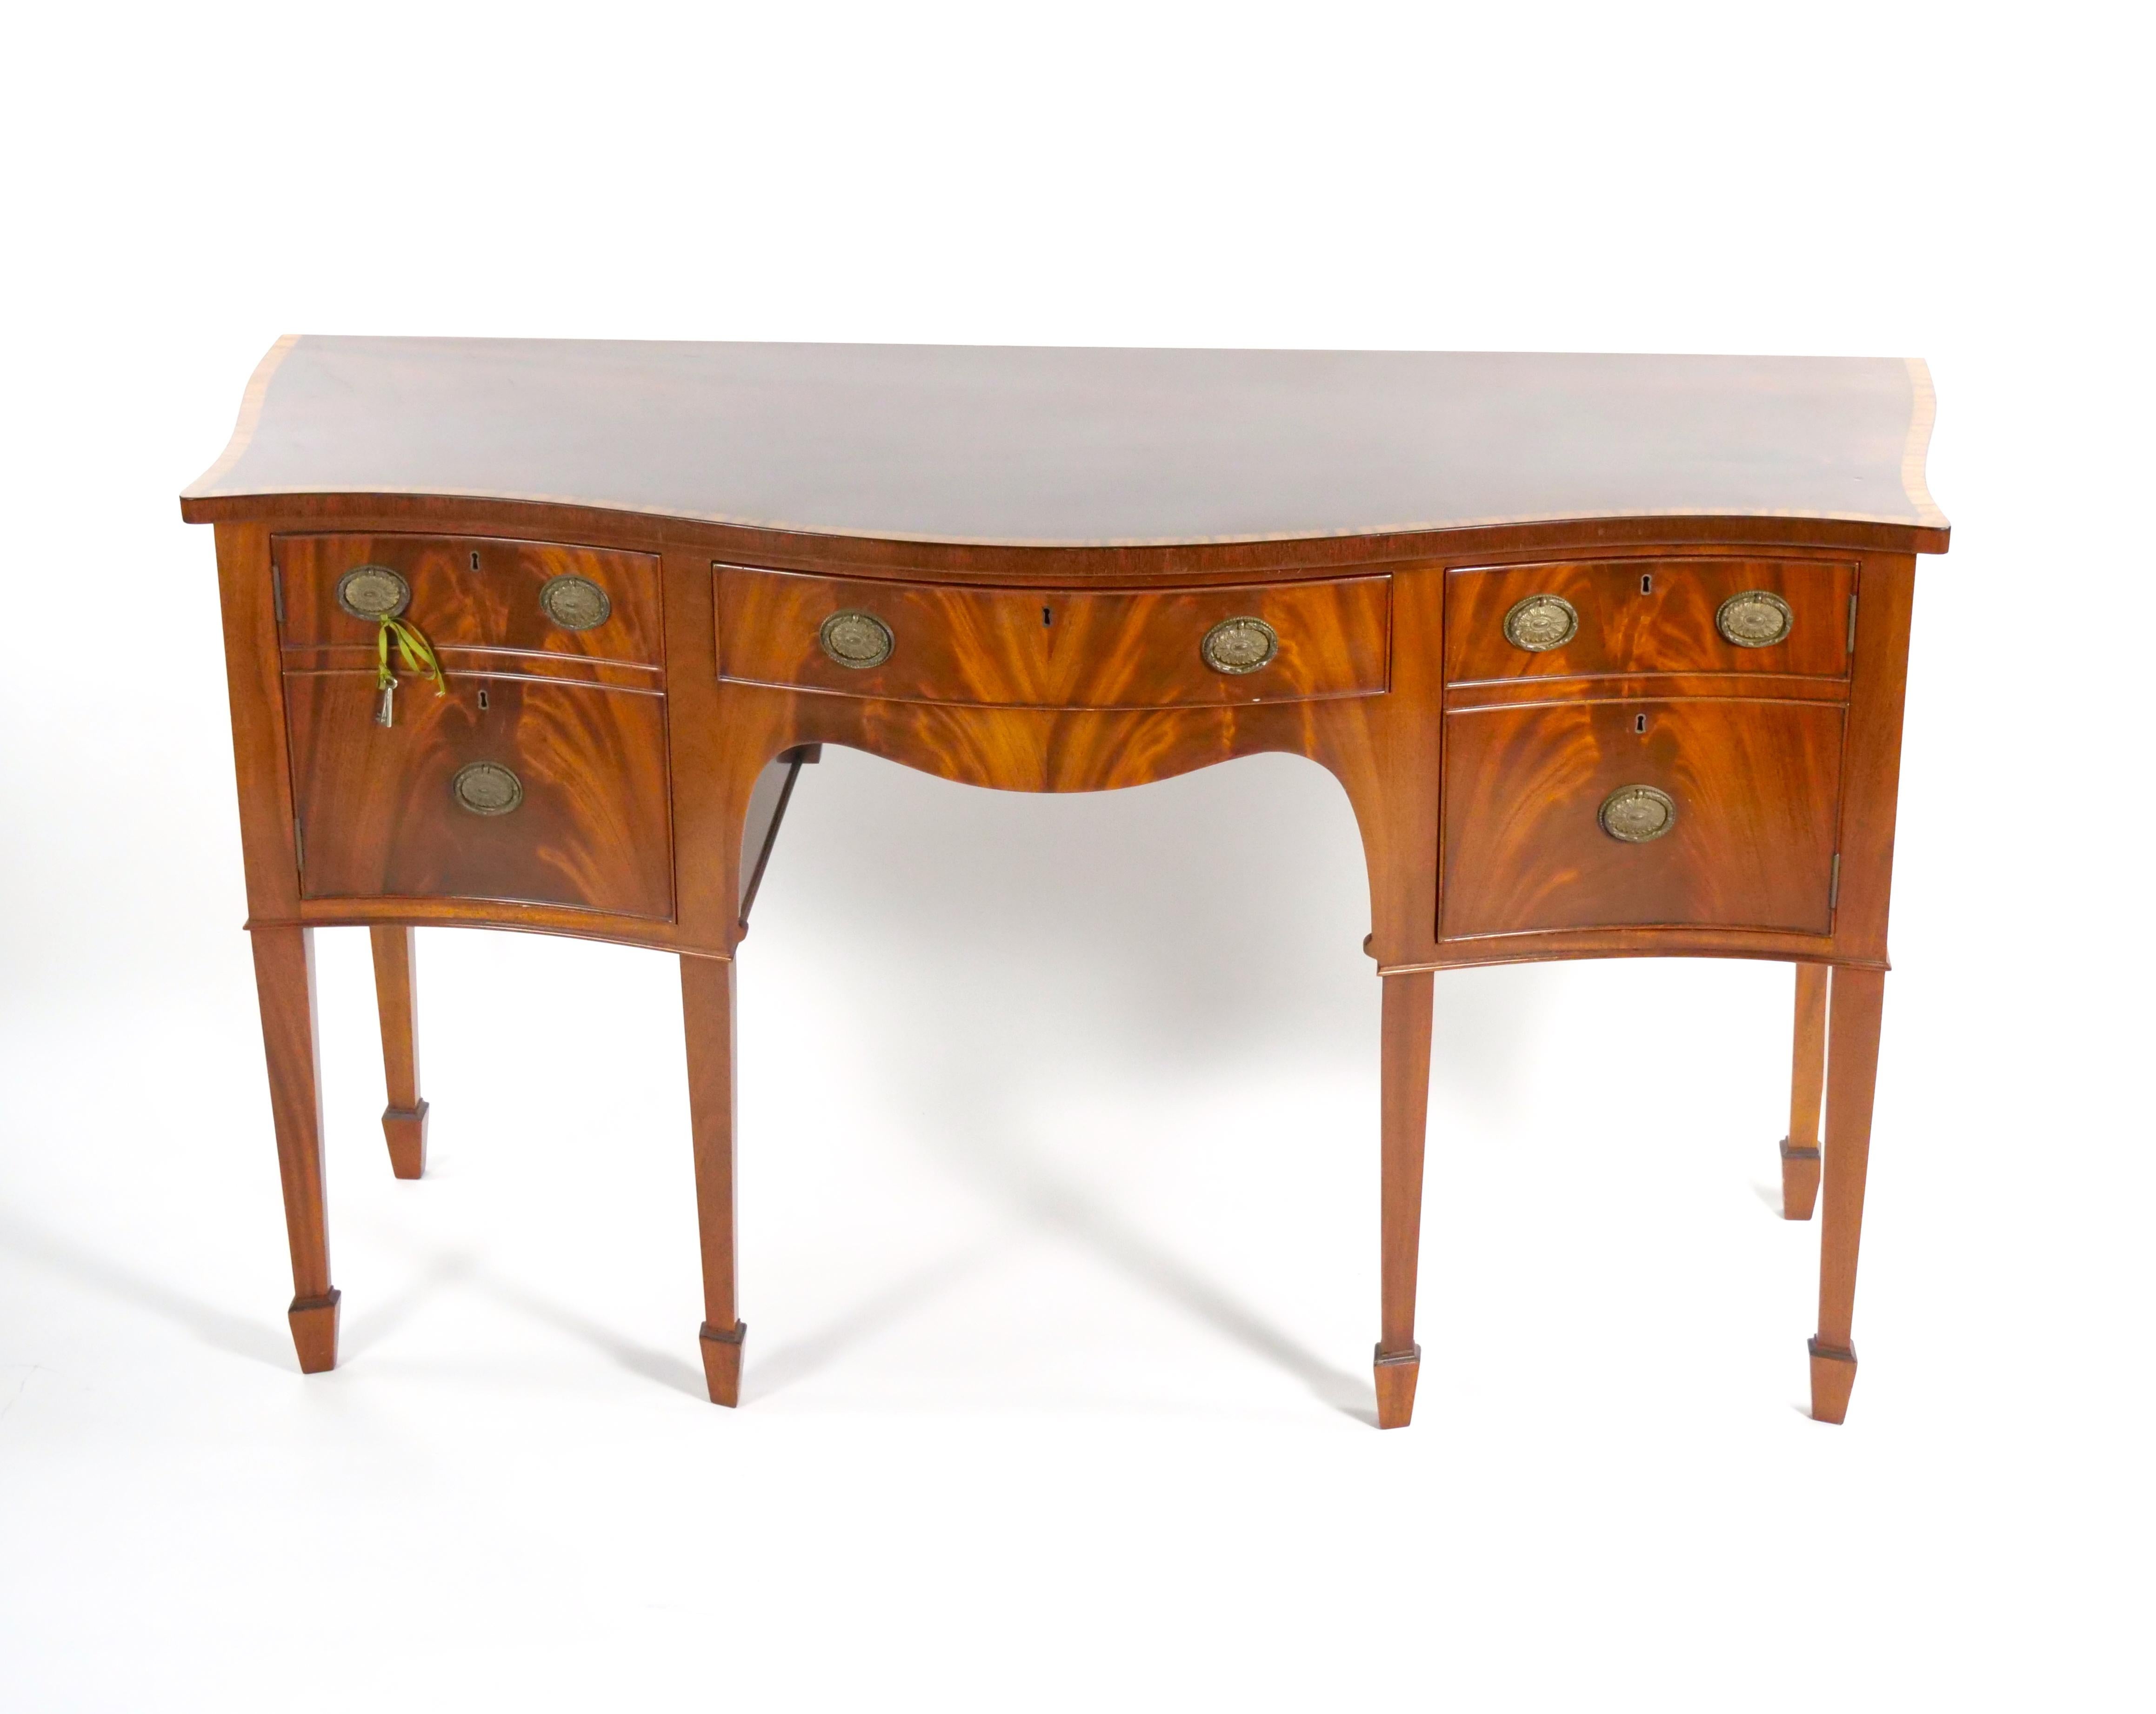 Early 20th Century George III Flame Mahogany Serpentine Sideboard / Server For Sale 1